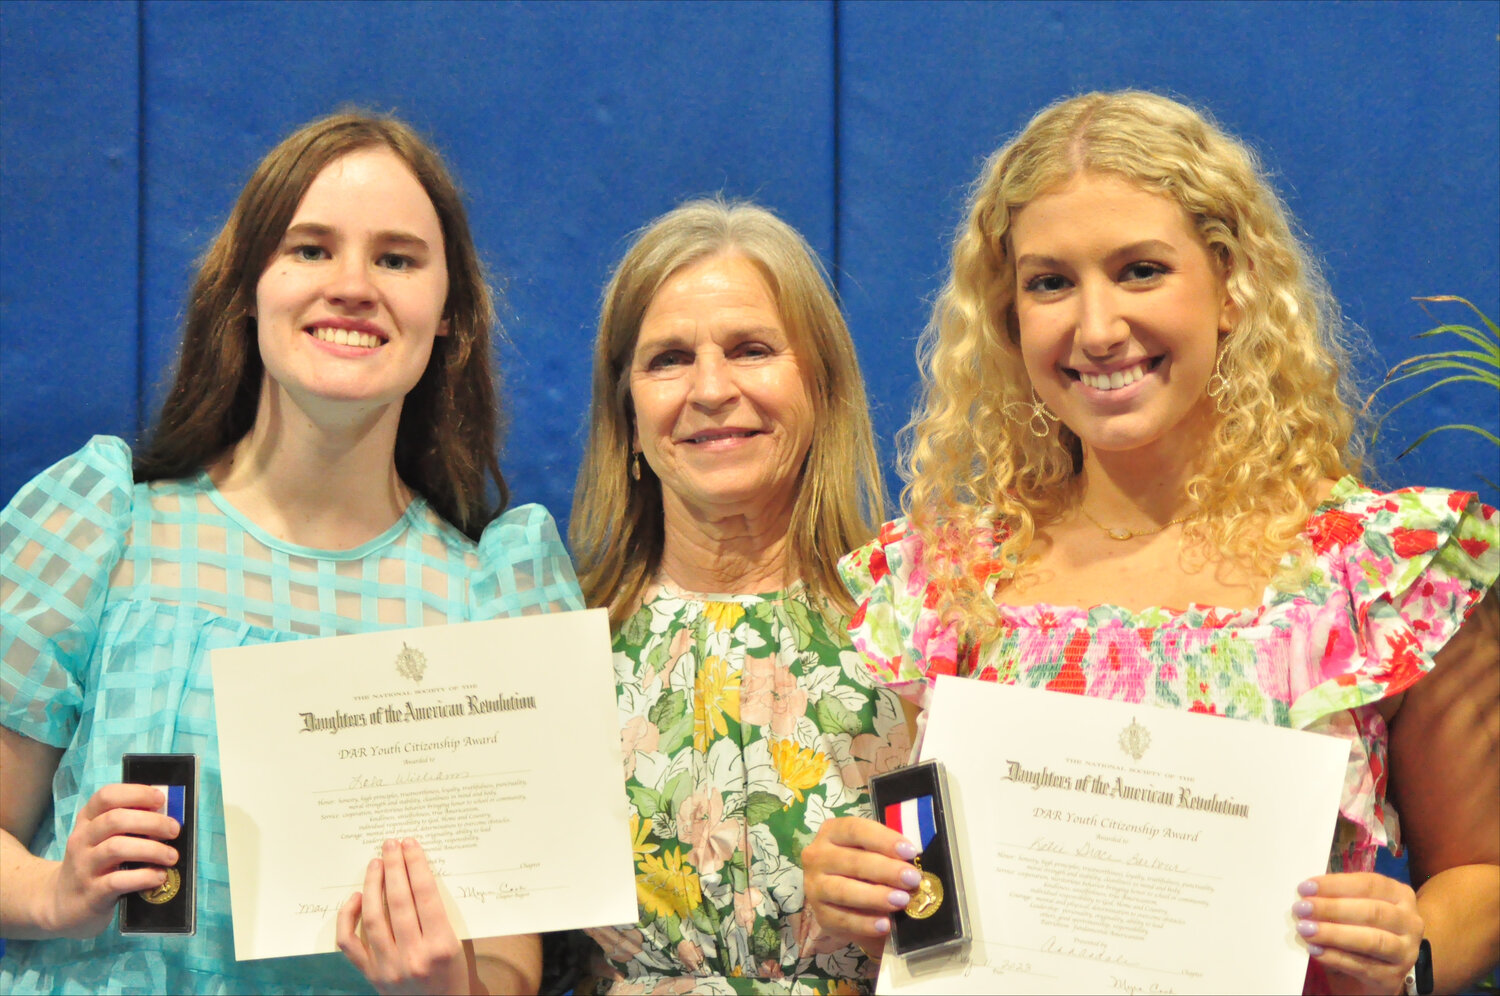 The DAR Youth Citizenship Medal is for a boy or girl in grades 5 through 11. The medal is awarded to students who fulfill the qualities of honor, service, courage, leadership, and patriotism. Debbie Cannon, Annandale Chapter DAR Good Citizen Chairman, presented  to 10th grader Katie Grace Barbour and 11th grader Lola Williams  at the MCHS Awards Day. Pictured are Lola Williams, Debbie Cannon, and Katie Grace Barbour.